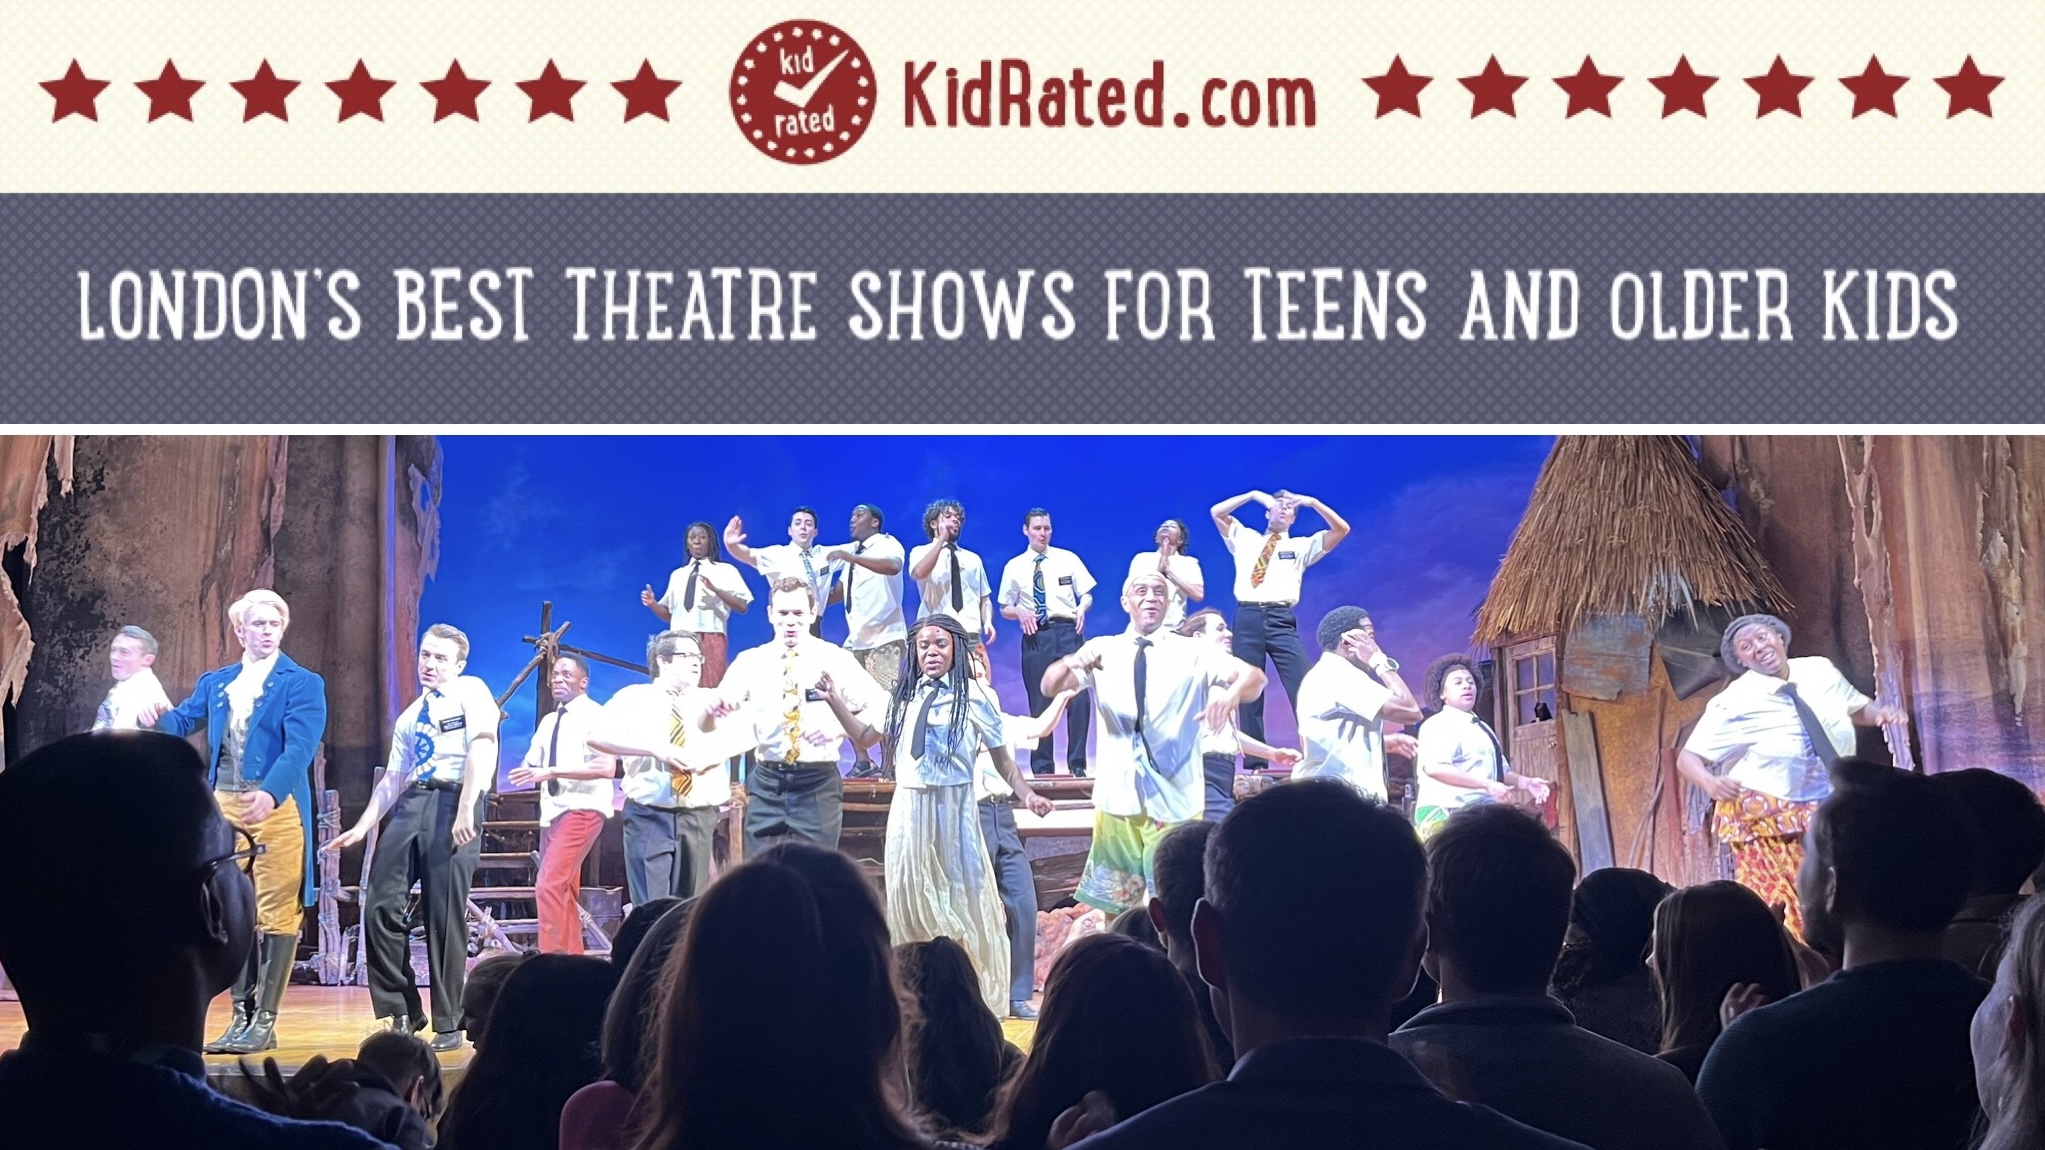 London's Best Theatre Shows for Teens and Older Kids